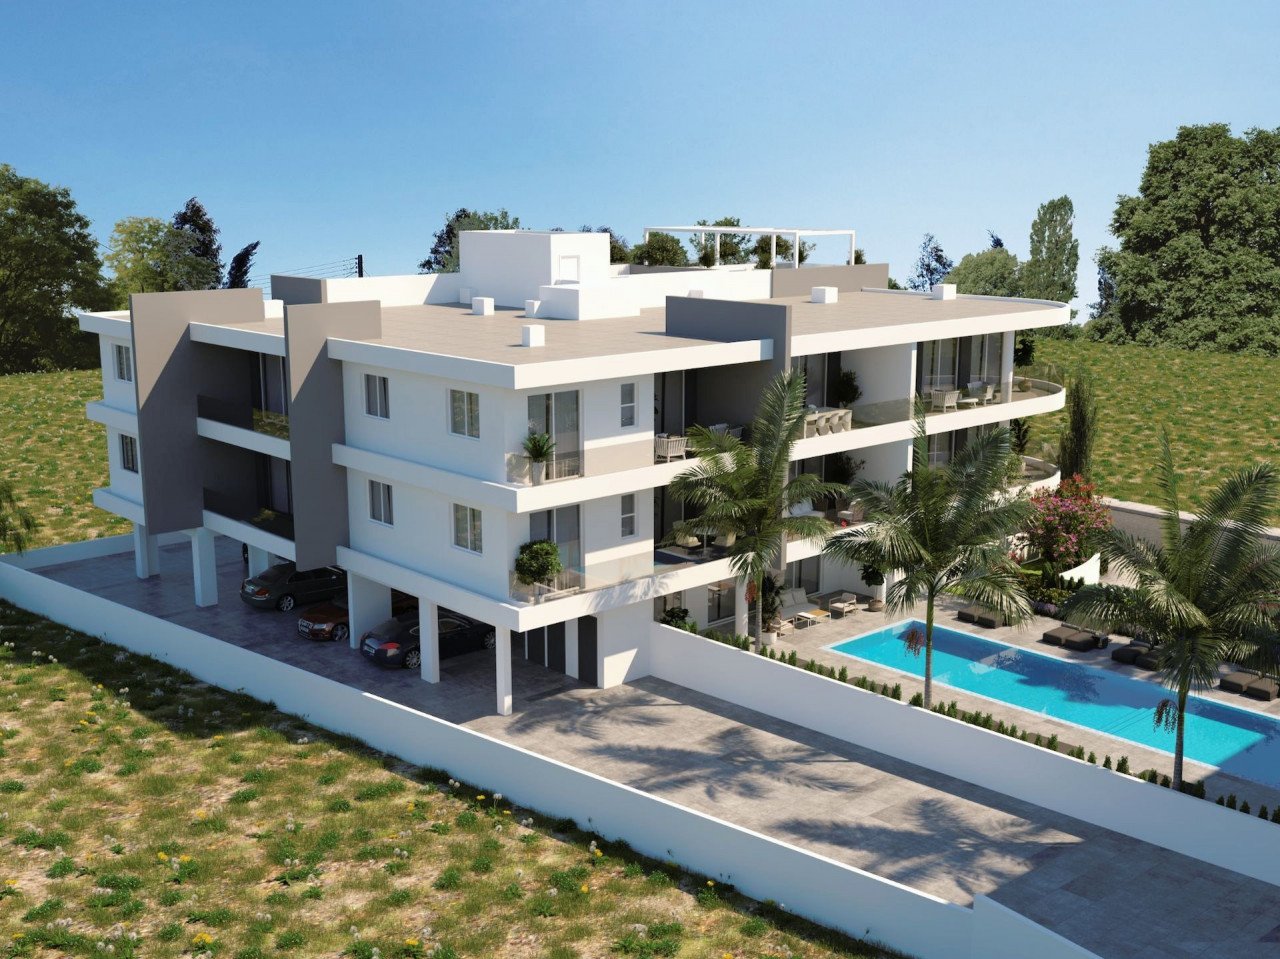 Property for Sale: Apartment (Flat) in Sotira, Famagusta  | Key Realtor Cyprus